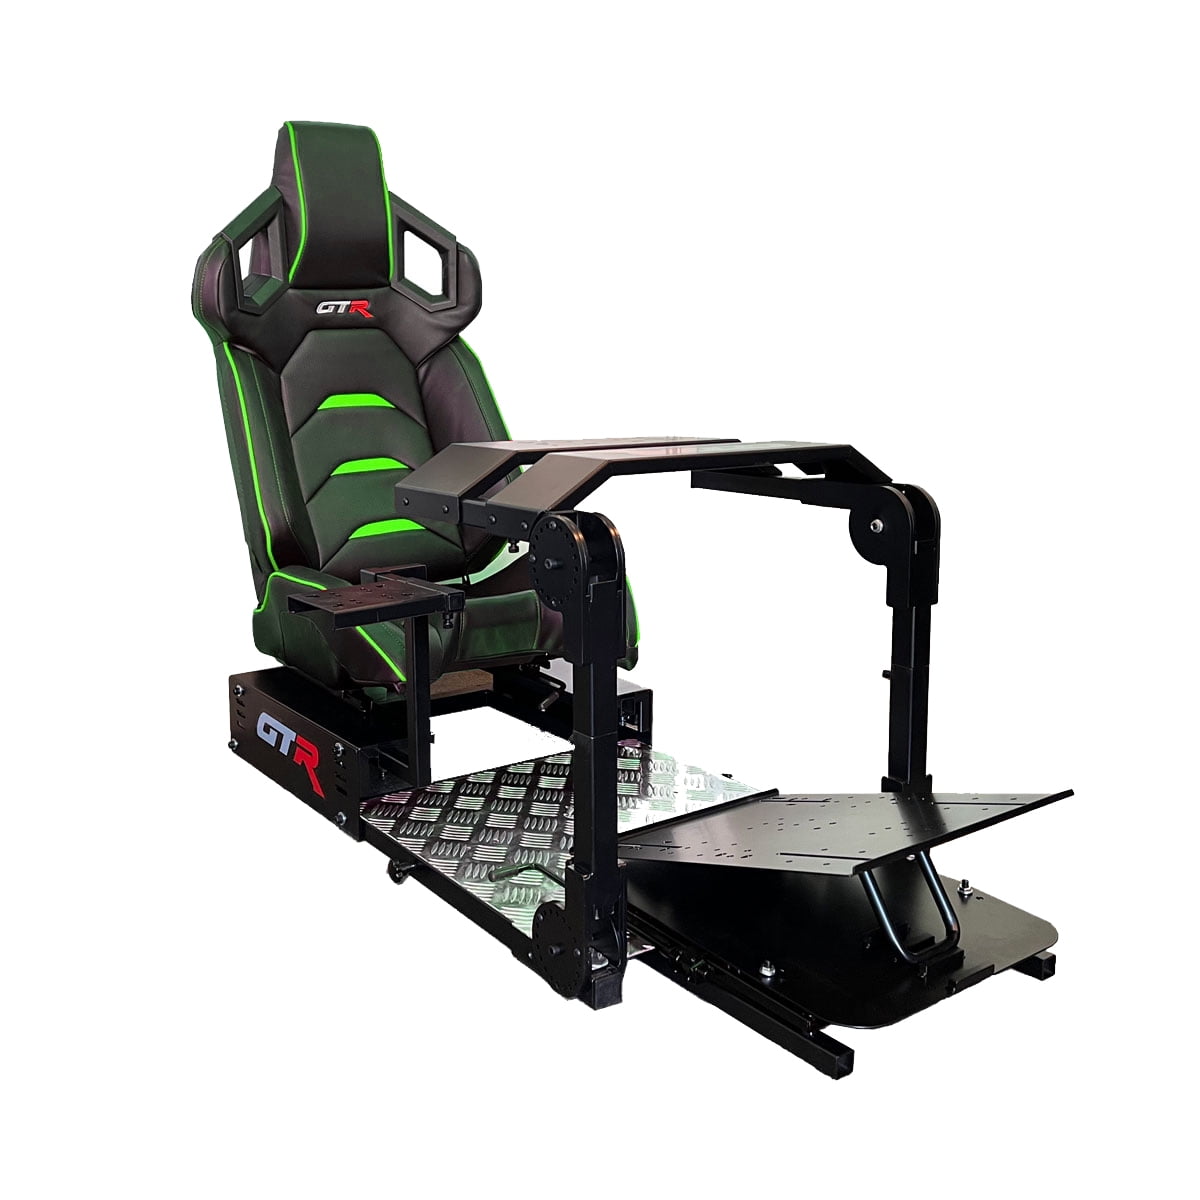 MoNiBloom Racing Simulator Cockpit Gaming Chair Game Seat Fit for